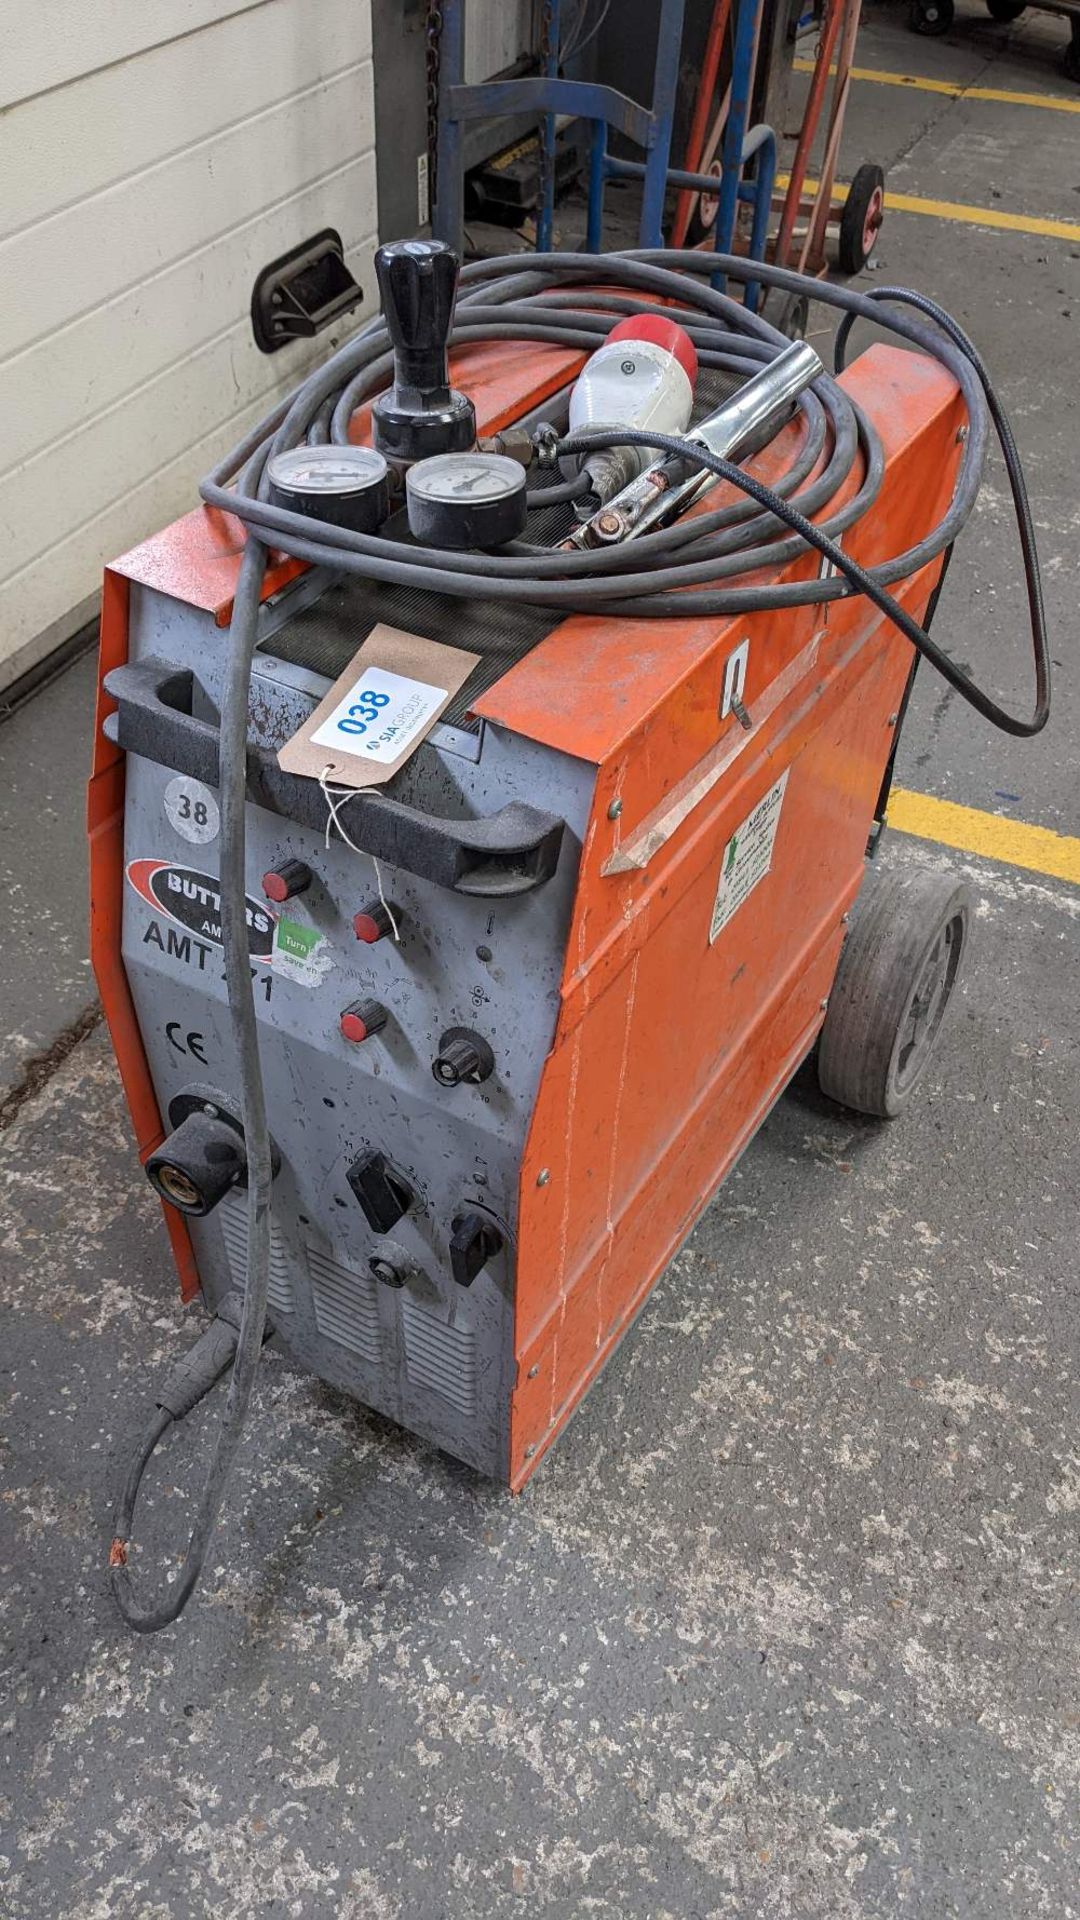 Butters 3-phase AMT271 MIG welder